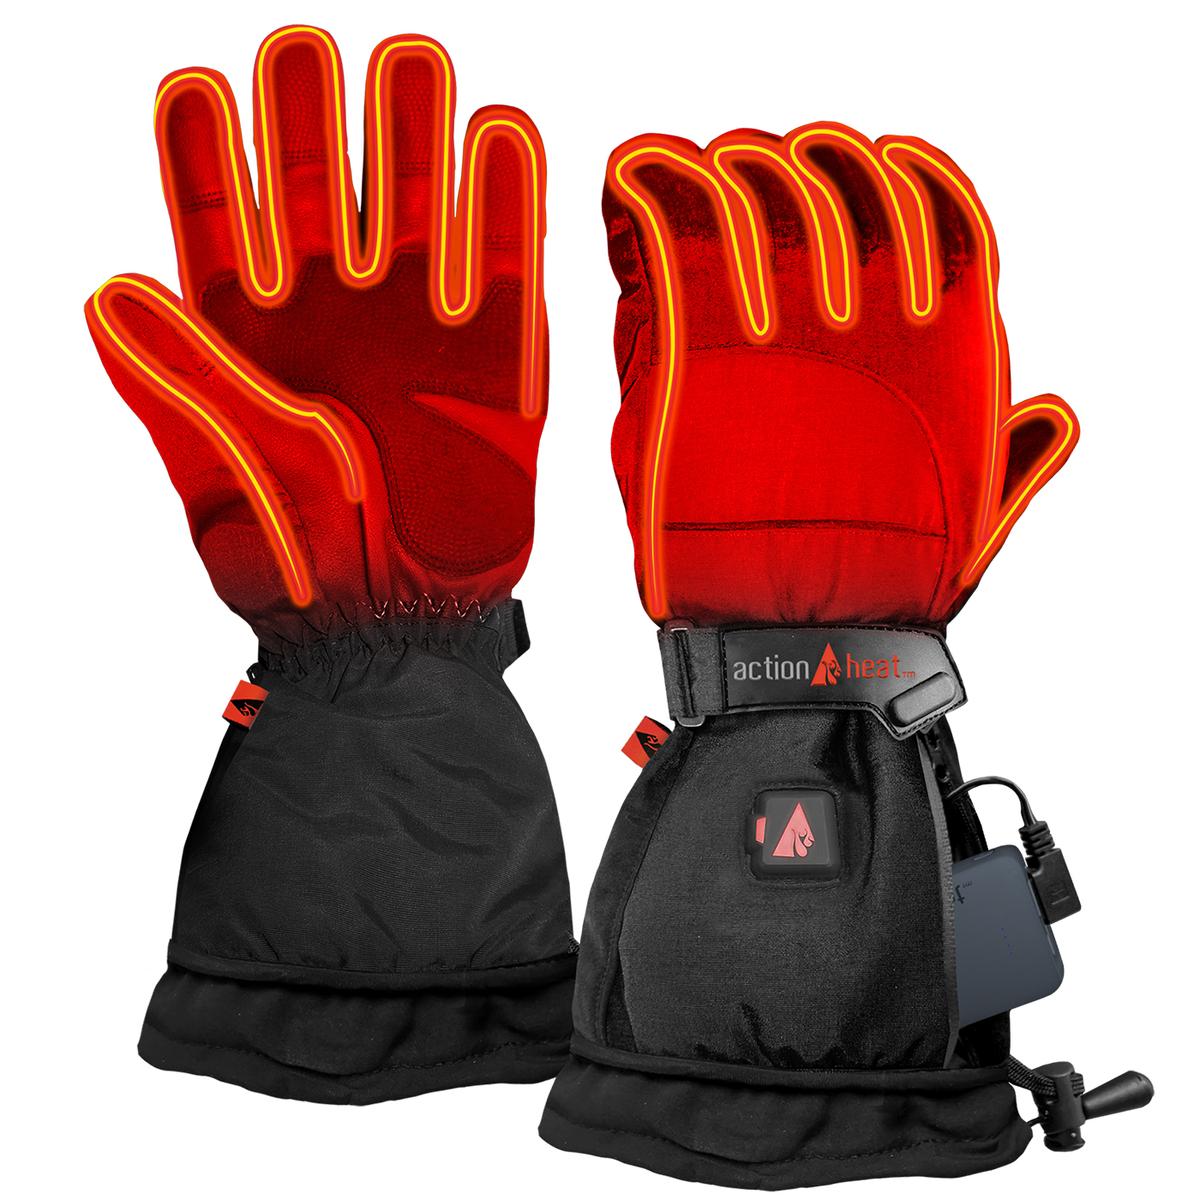 Heated Fishing Gloves - Fishing Gloves Battery Winter Sports